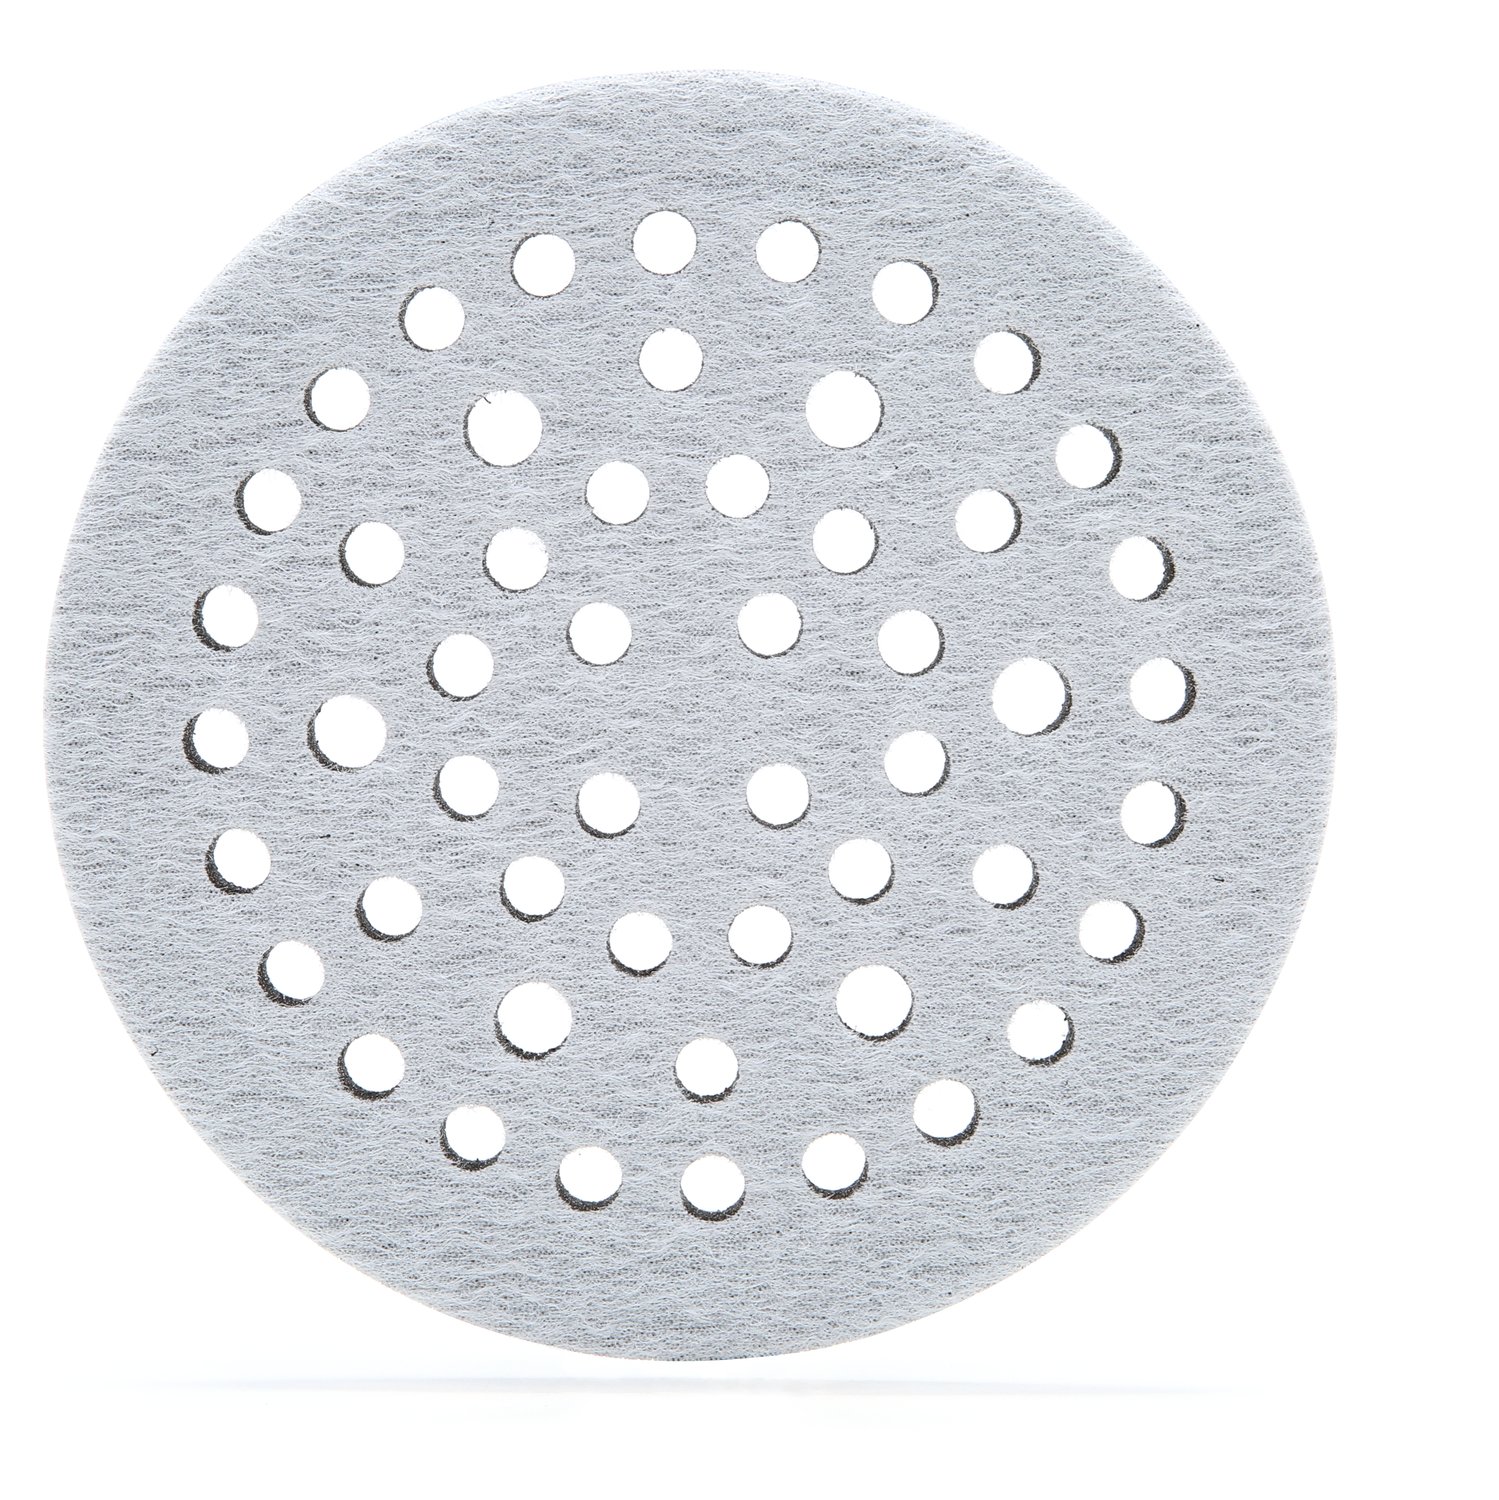 7100005497 - 3M Clean Sanding Soft Interface Disc Pad 28322, 6 in x 1/2 in 52 Holes,
10 ea/Case